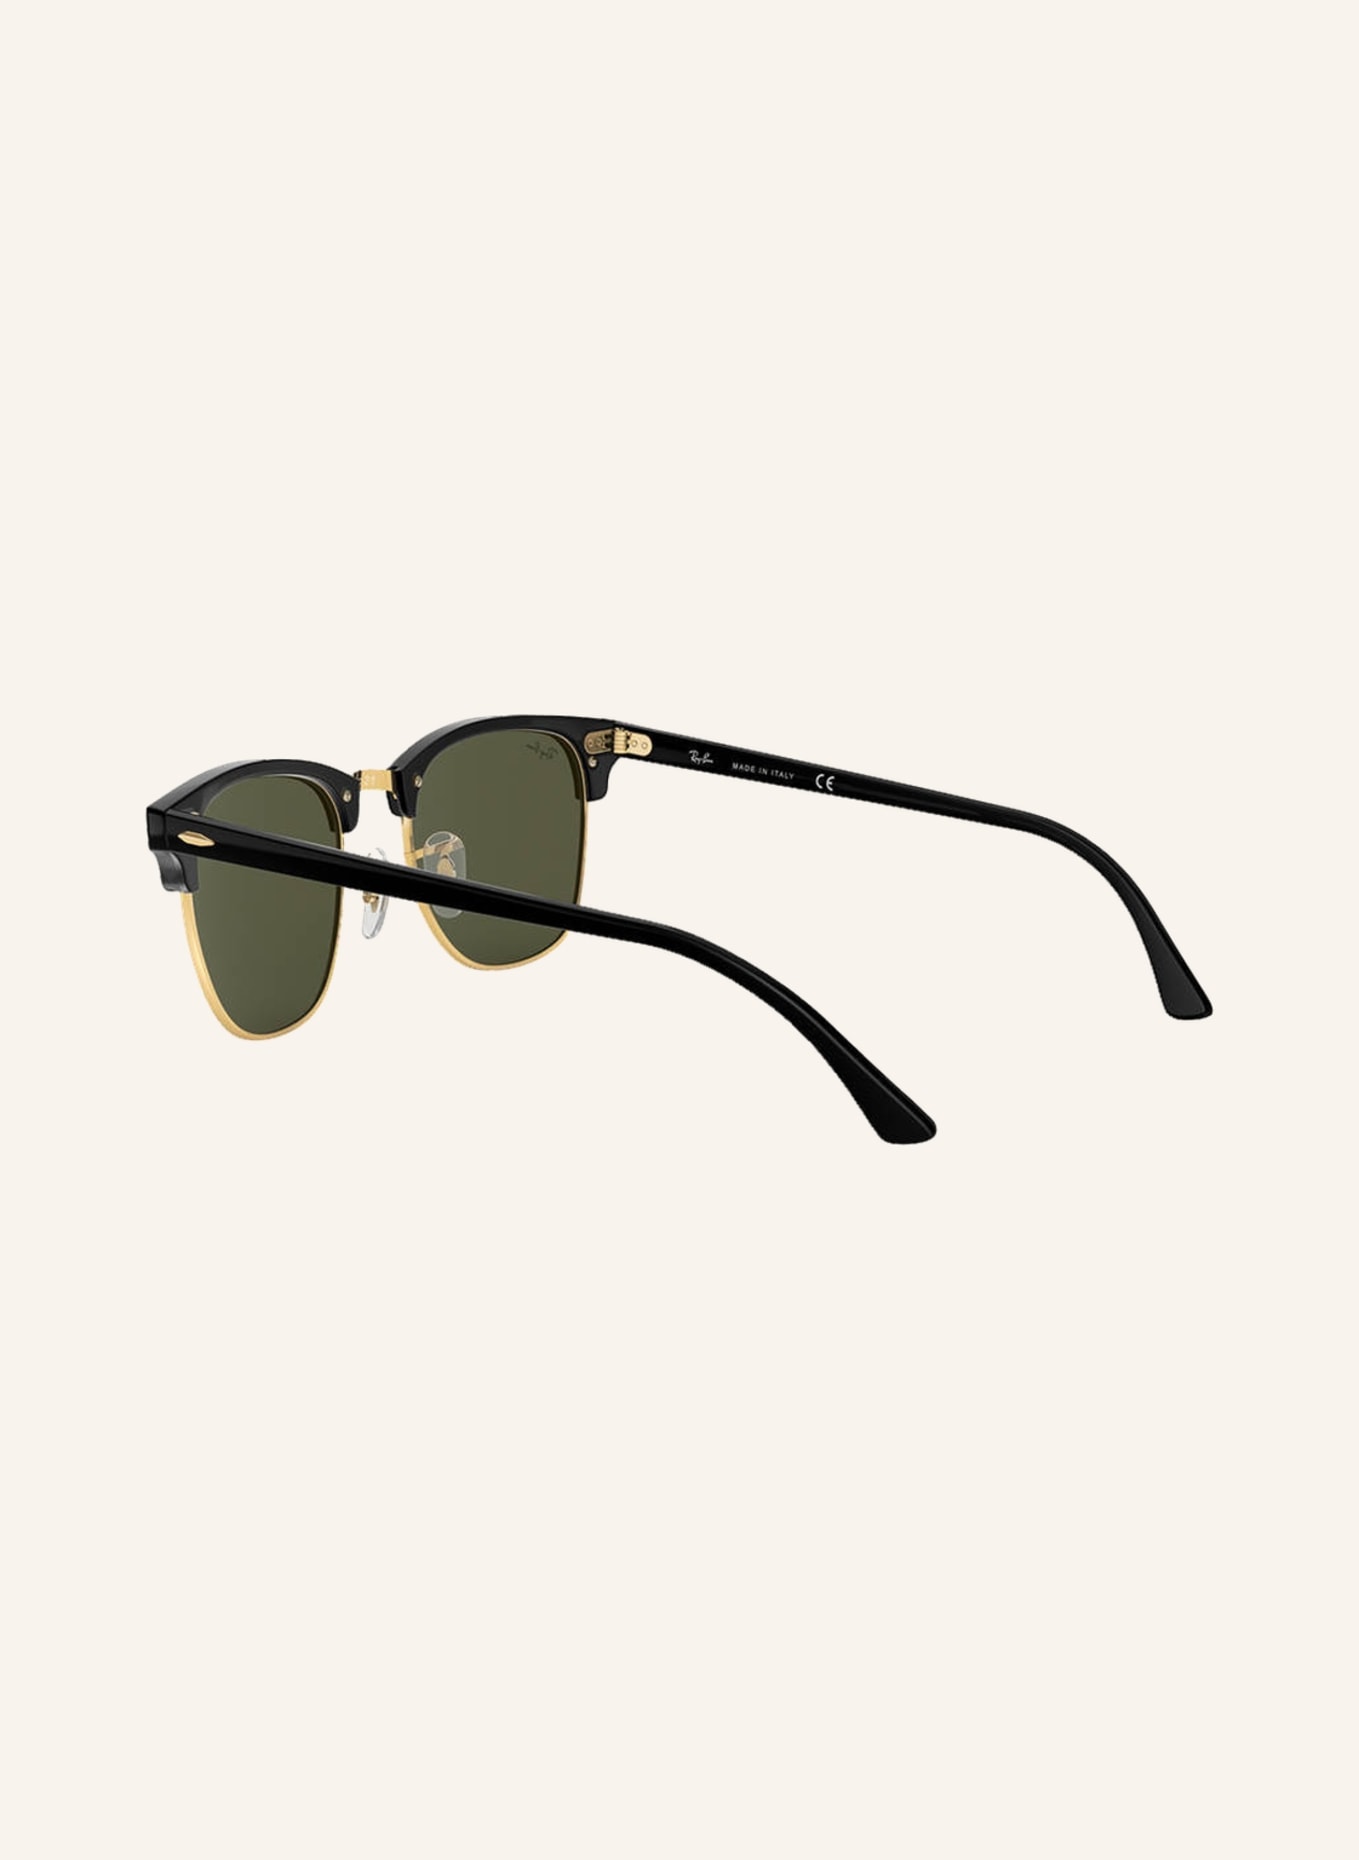 Ray-Ban Sunglasses RB3016 CLUBMASTER, Color: W0365 - BLACK/GOLD / DARK GREEN (Image 4)